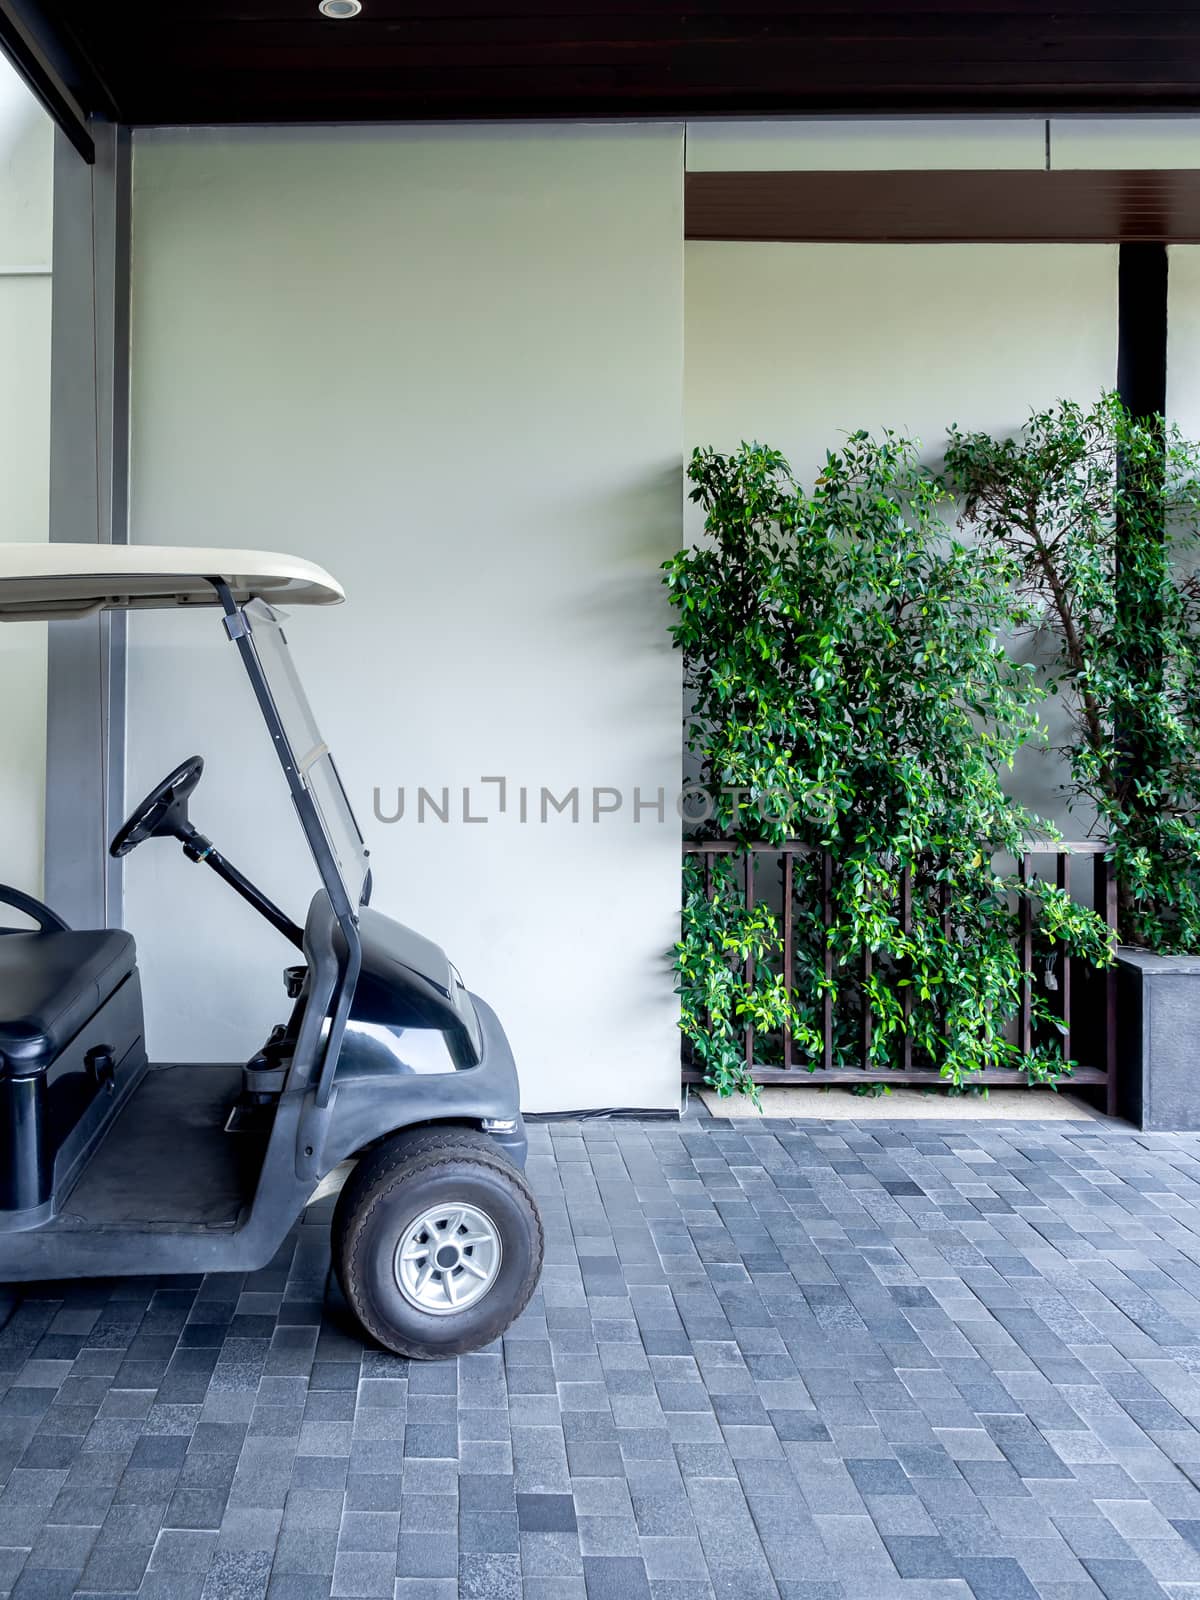 Black golf cart or golf buggy car in the hotel service for customer, vertical style.